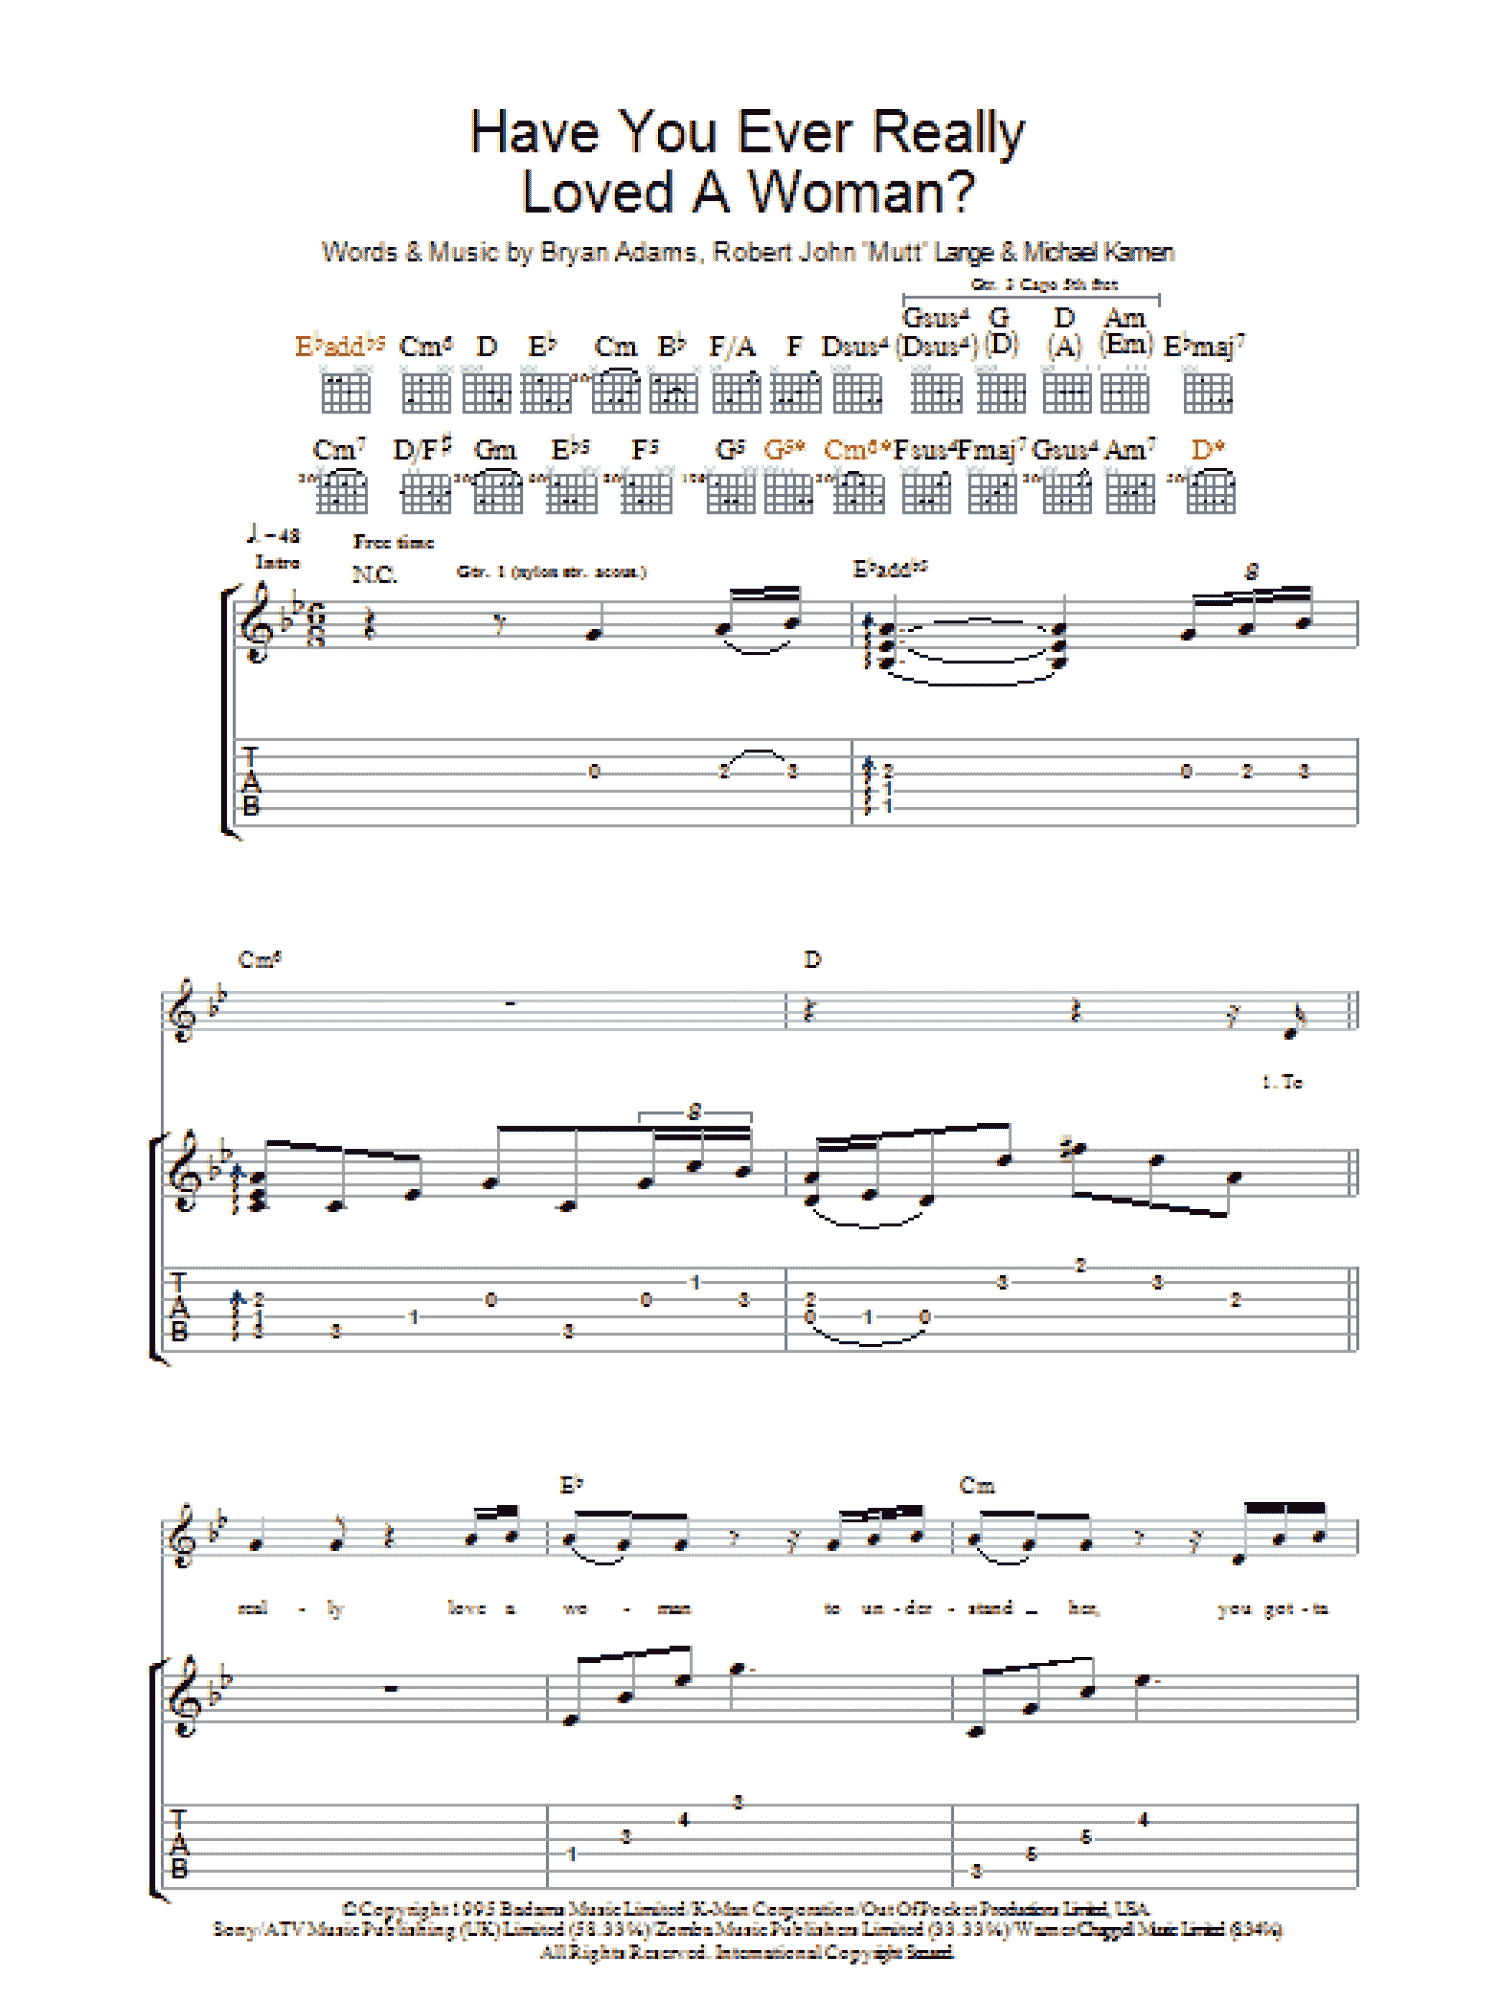 Have You Ever Really Loved A Woman? (Guitar Tab)